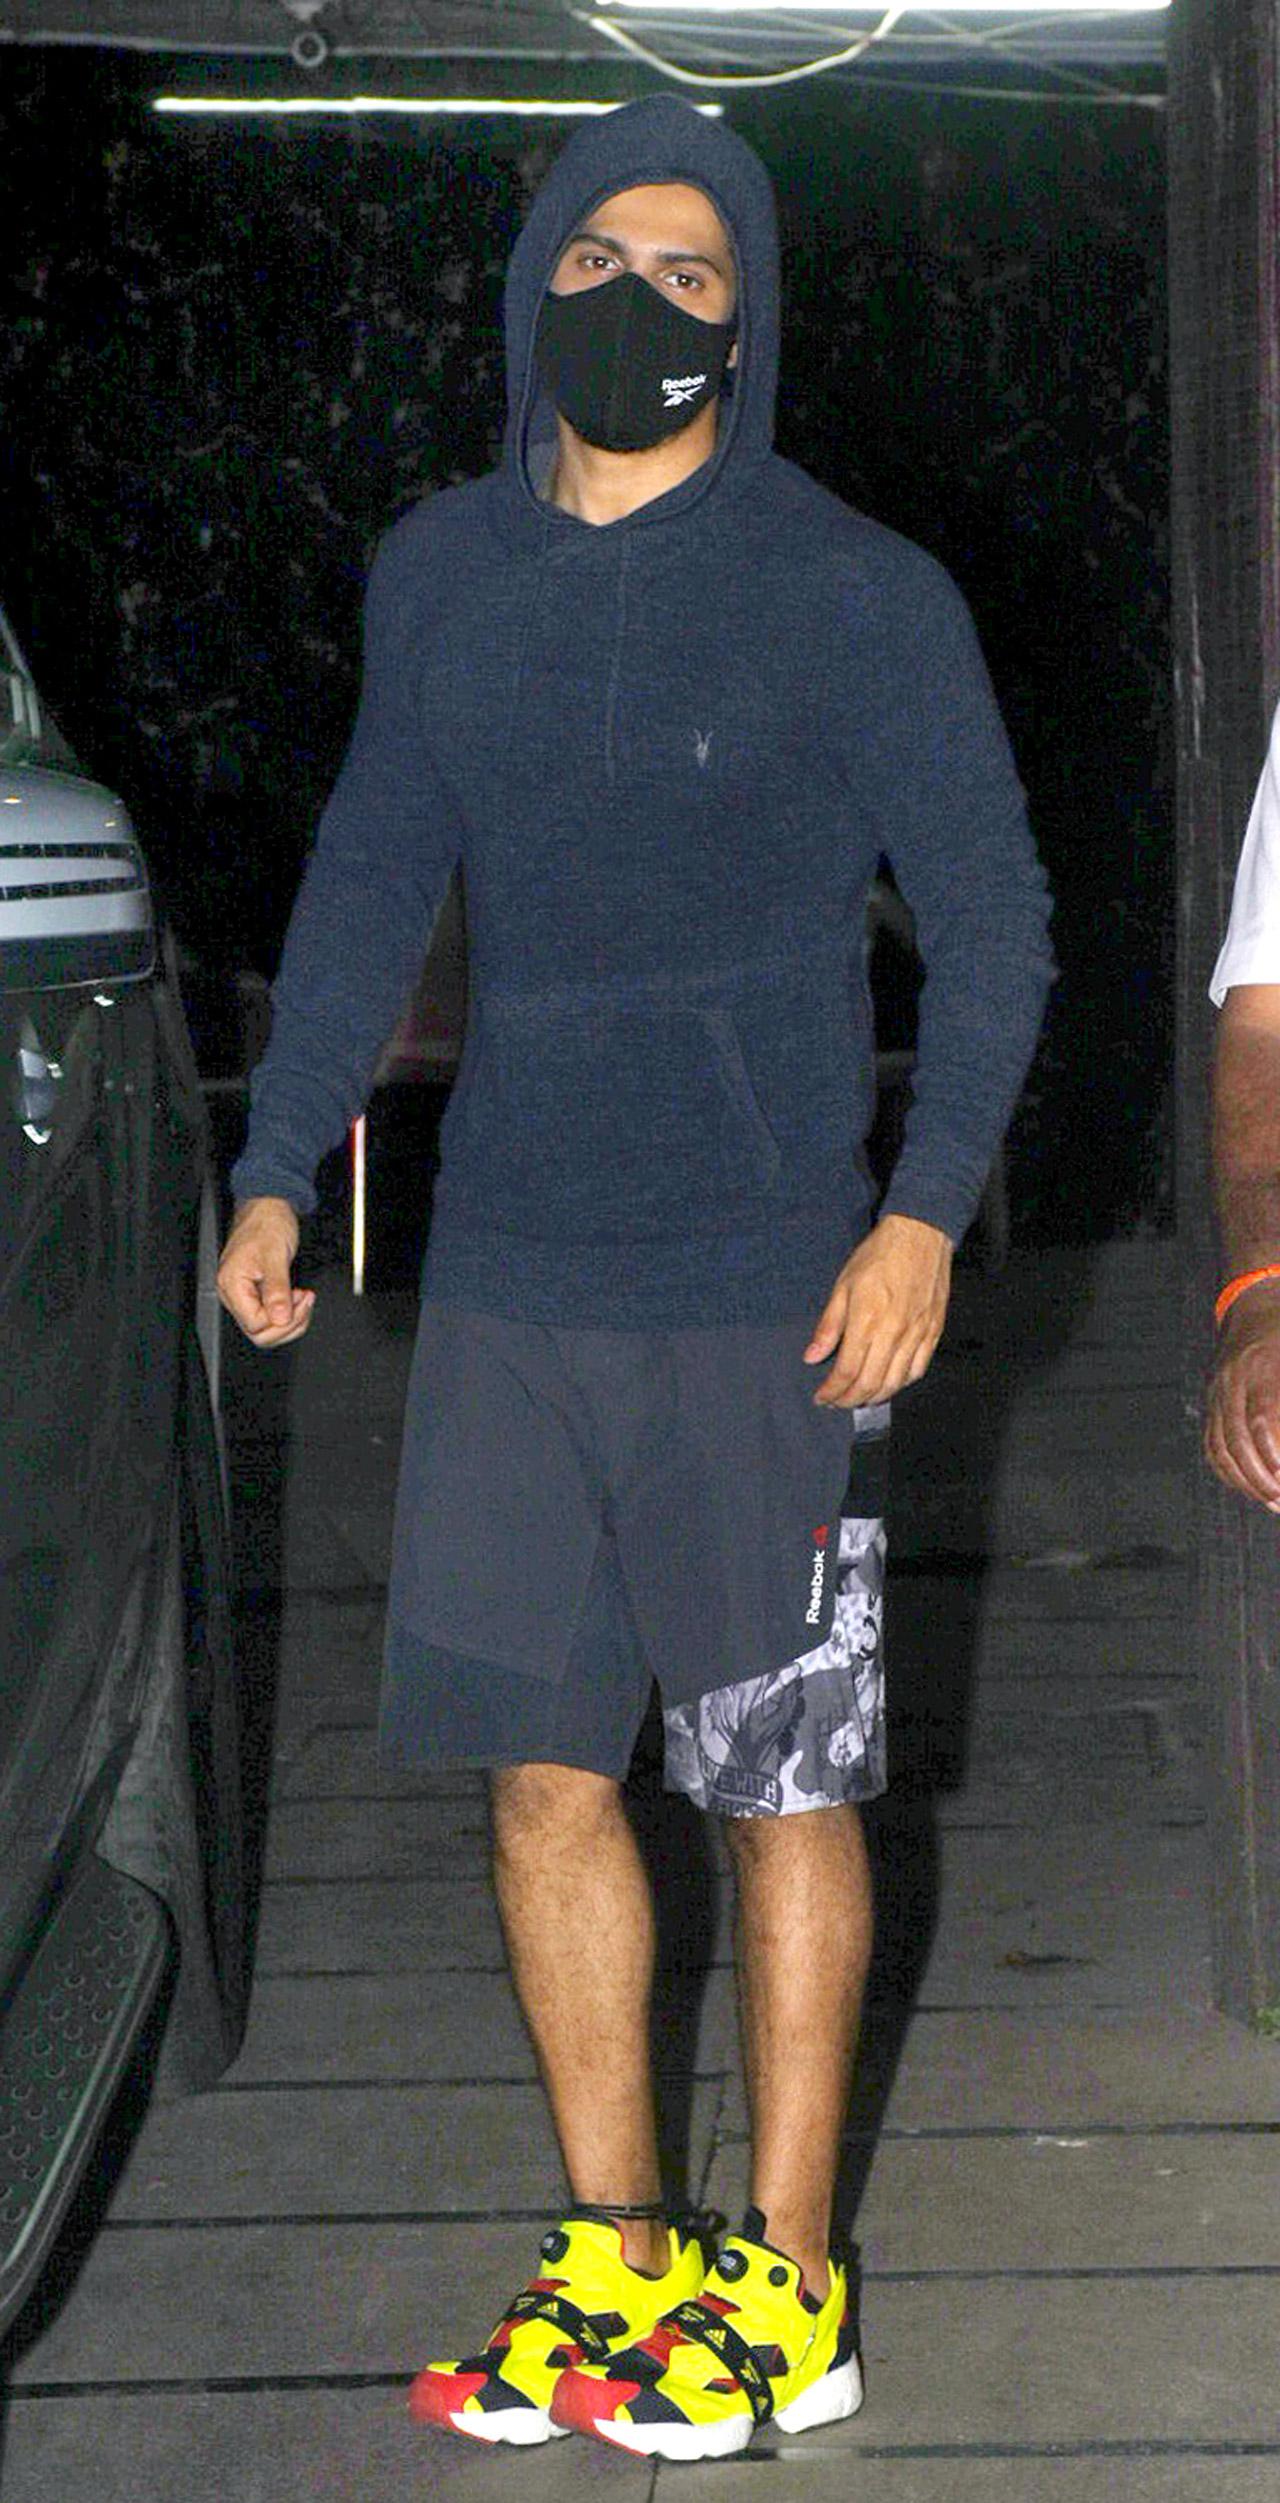 Varun Dhawan was also spotted at his gym in Juhu, Mumbai. The Coolie No. 1 actor opted for a dark blue hoodie and a grey track pant for his workout.